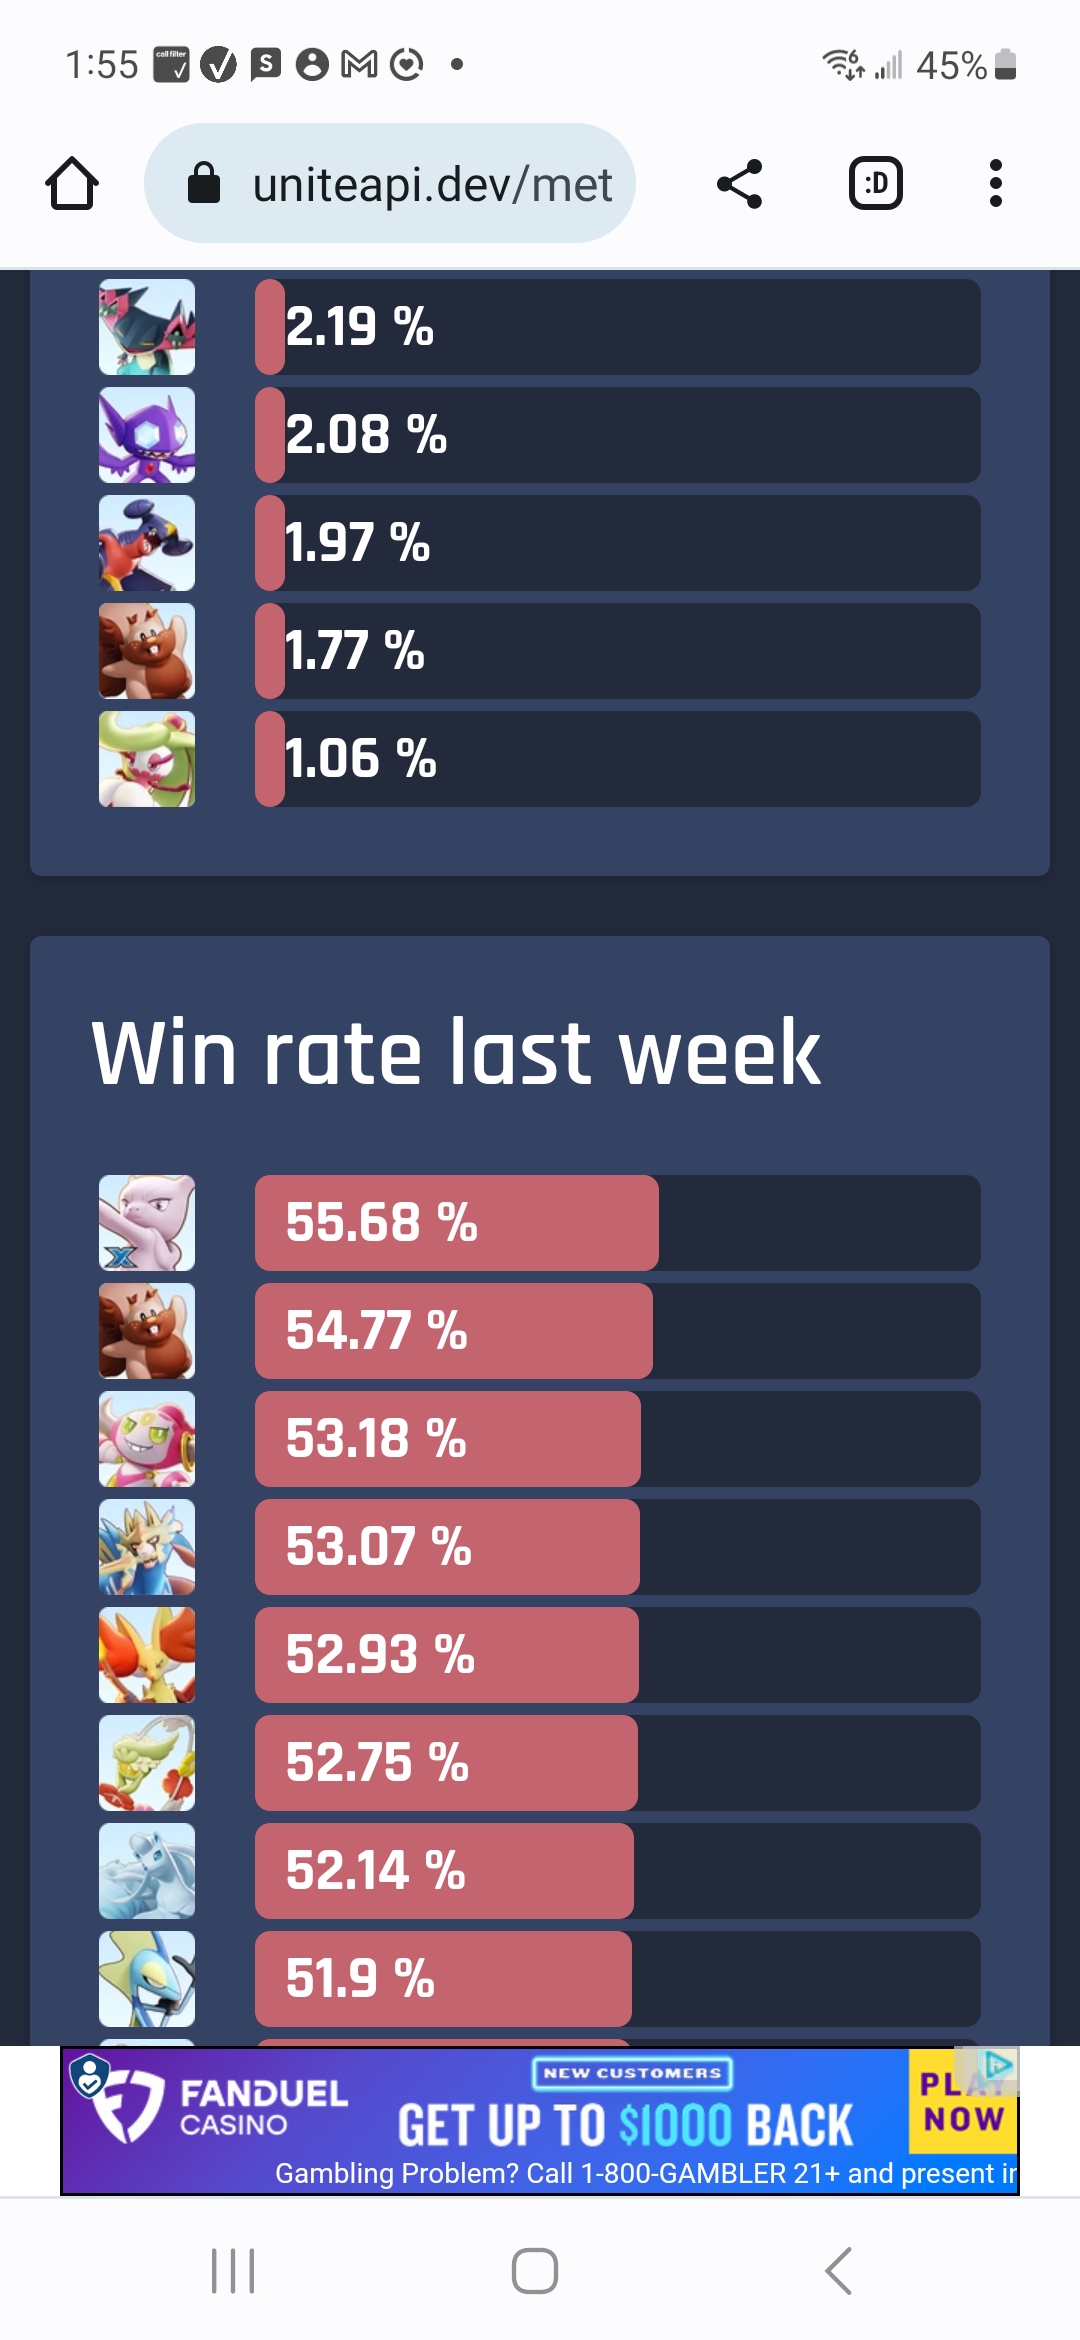 2nd least picked and 2nd highest win rate. Perfectly balanced, as all  things should be.